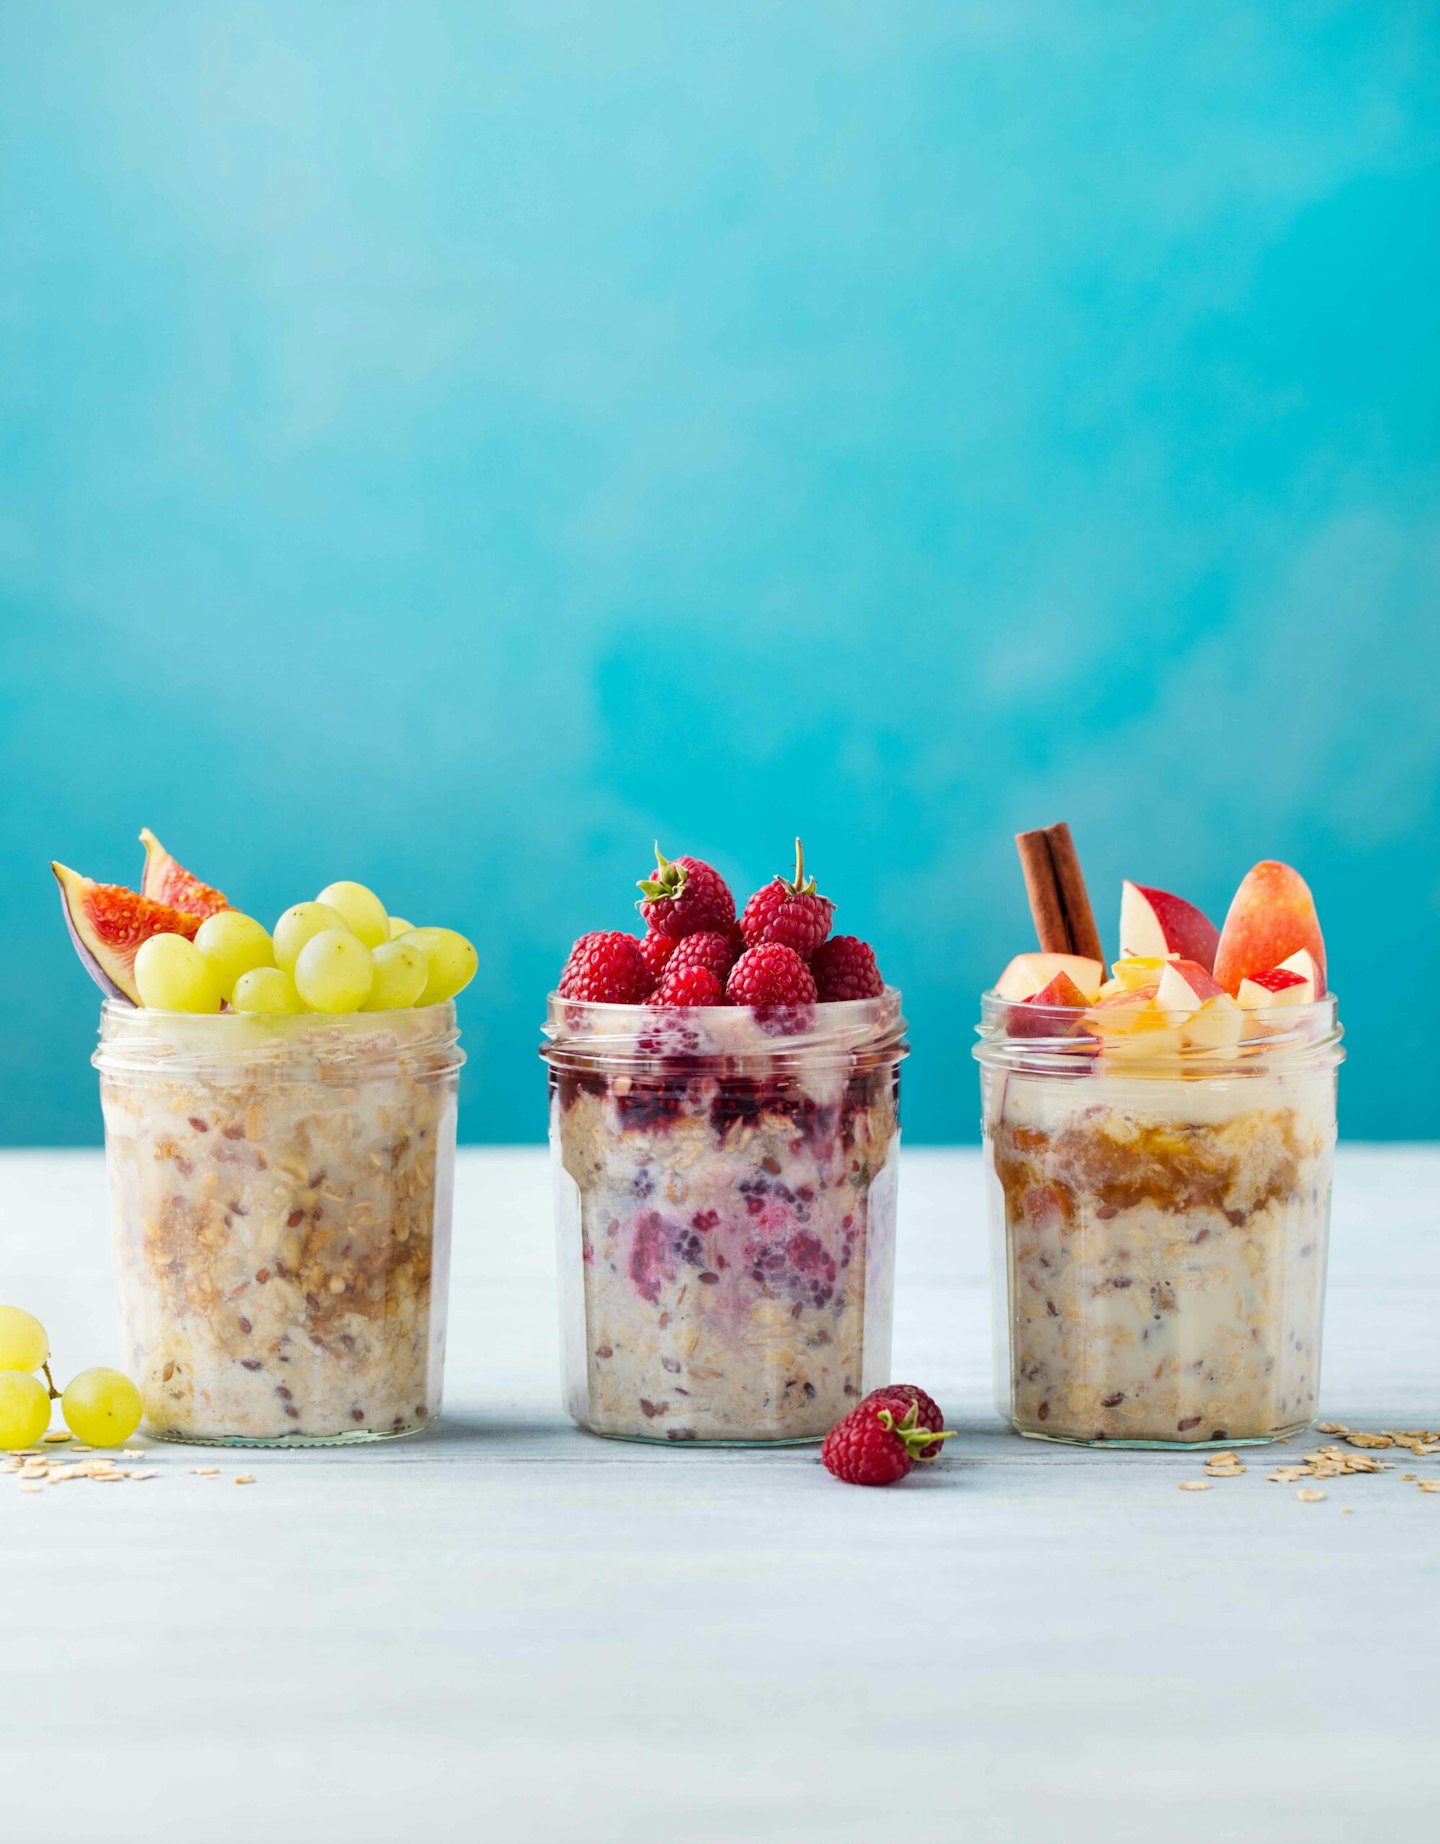 Assortment overnight oats, bircher muesli with fresh berries and fruits. Copy space.